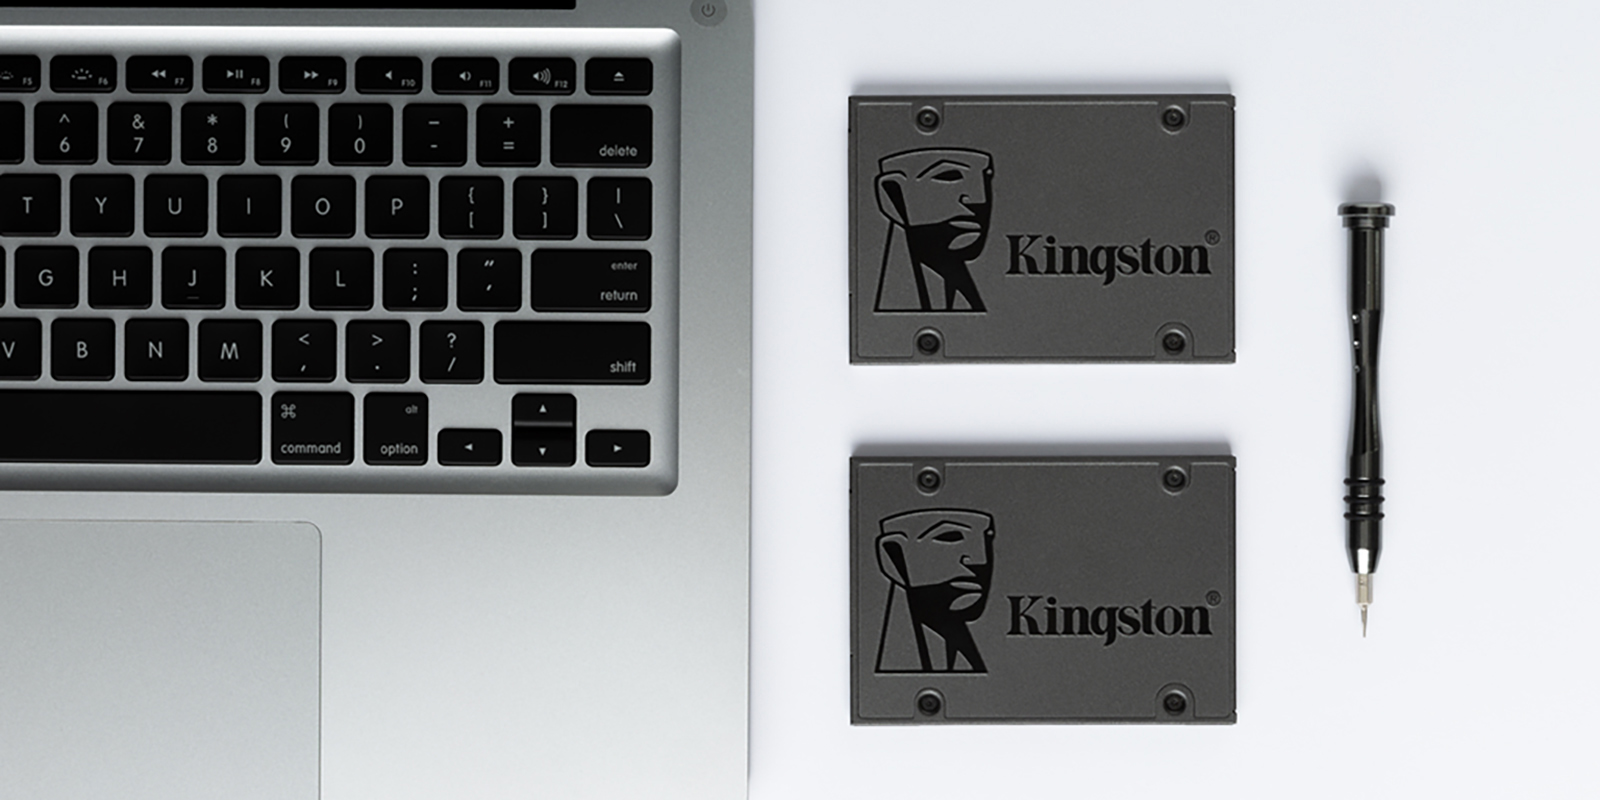 How to Install a 2.5 SATA SSD in a Laptop – Kingston Technology 